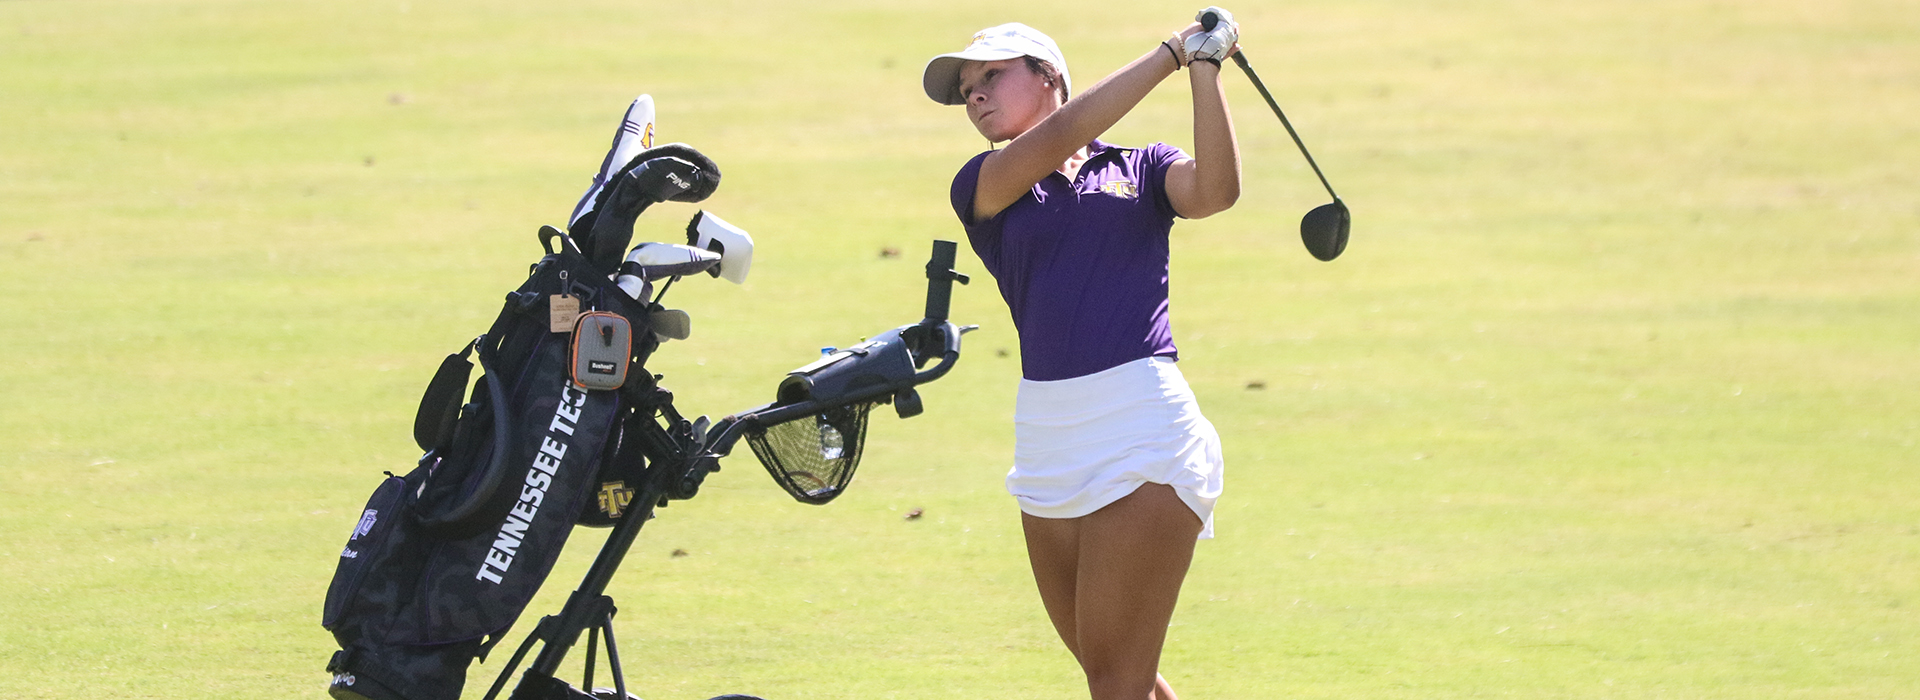 Golden Eagles show improvement on day two of Golfweek/AJT Intercollegiate